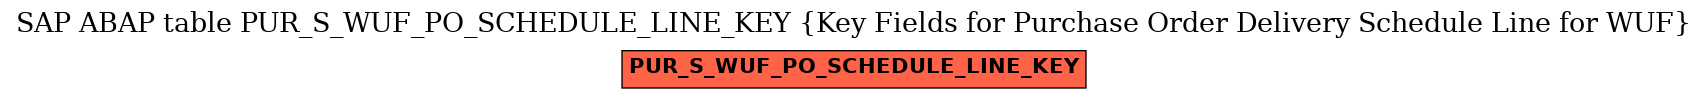 E-R Diagram for table PUR_S_WUF_PO_SCHEDULE_LINE_KEY (Key Fields for Purchase Order Delivery Schedule Line for WUF)